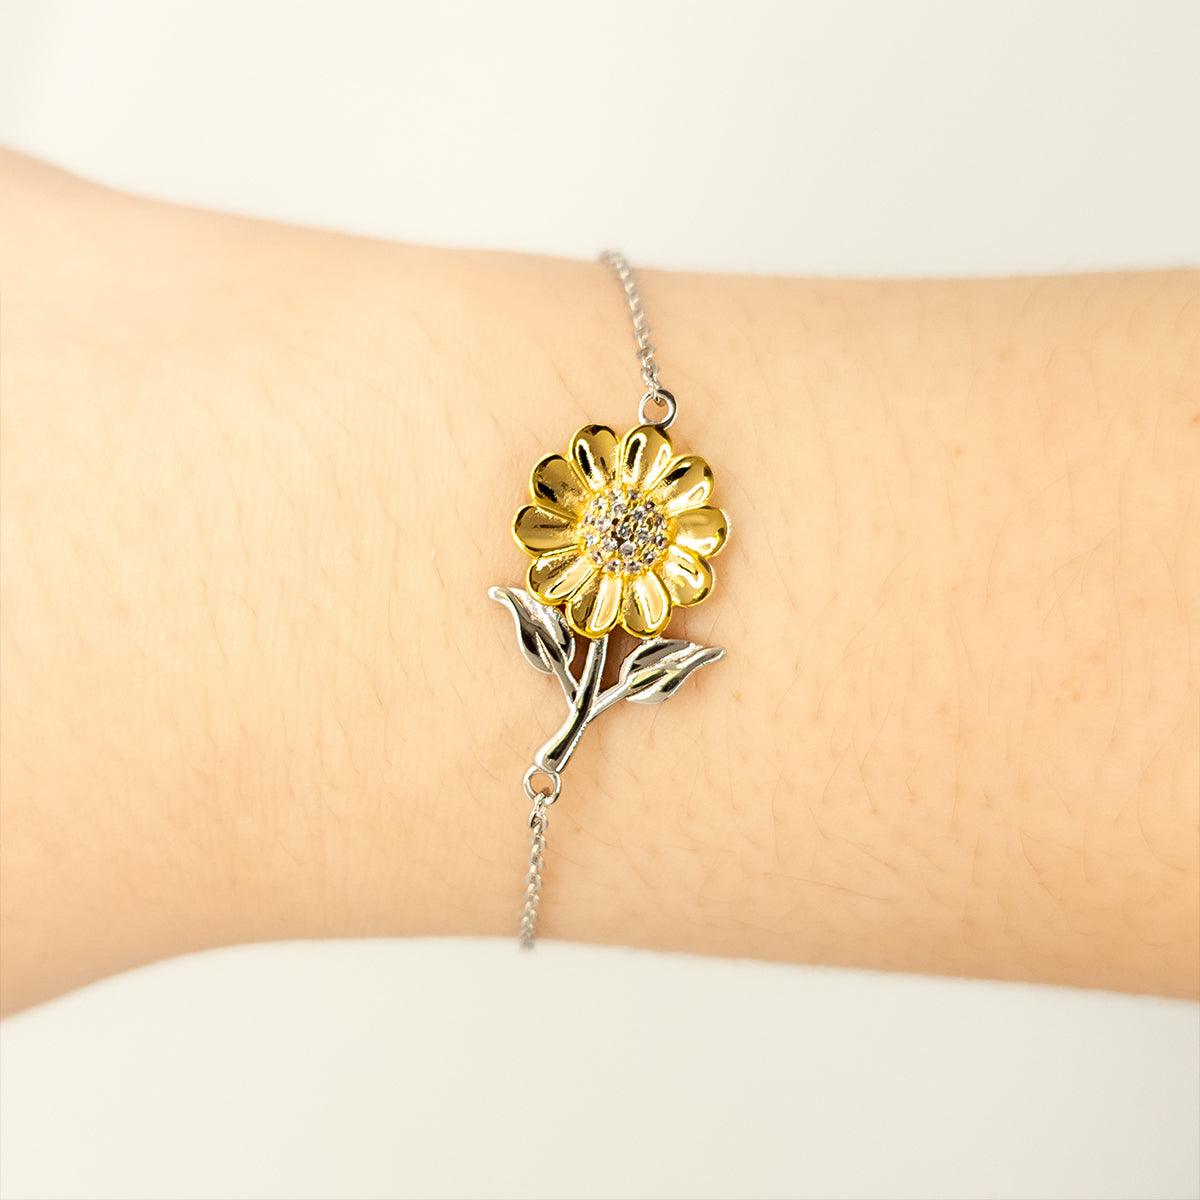 Sunflower Bracelet for Mommy Present, Mommy Always follow your dreams, never forget how amazing you are, Mommy Birthday Christmas Gifts Jewelry for Girls Boys Teen Men Women - Mallard Moon Gift Shop